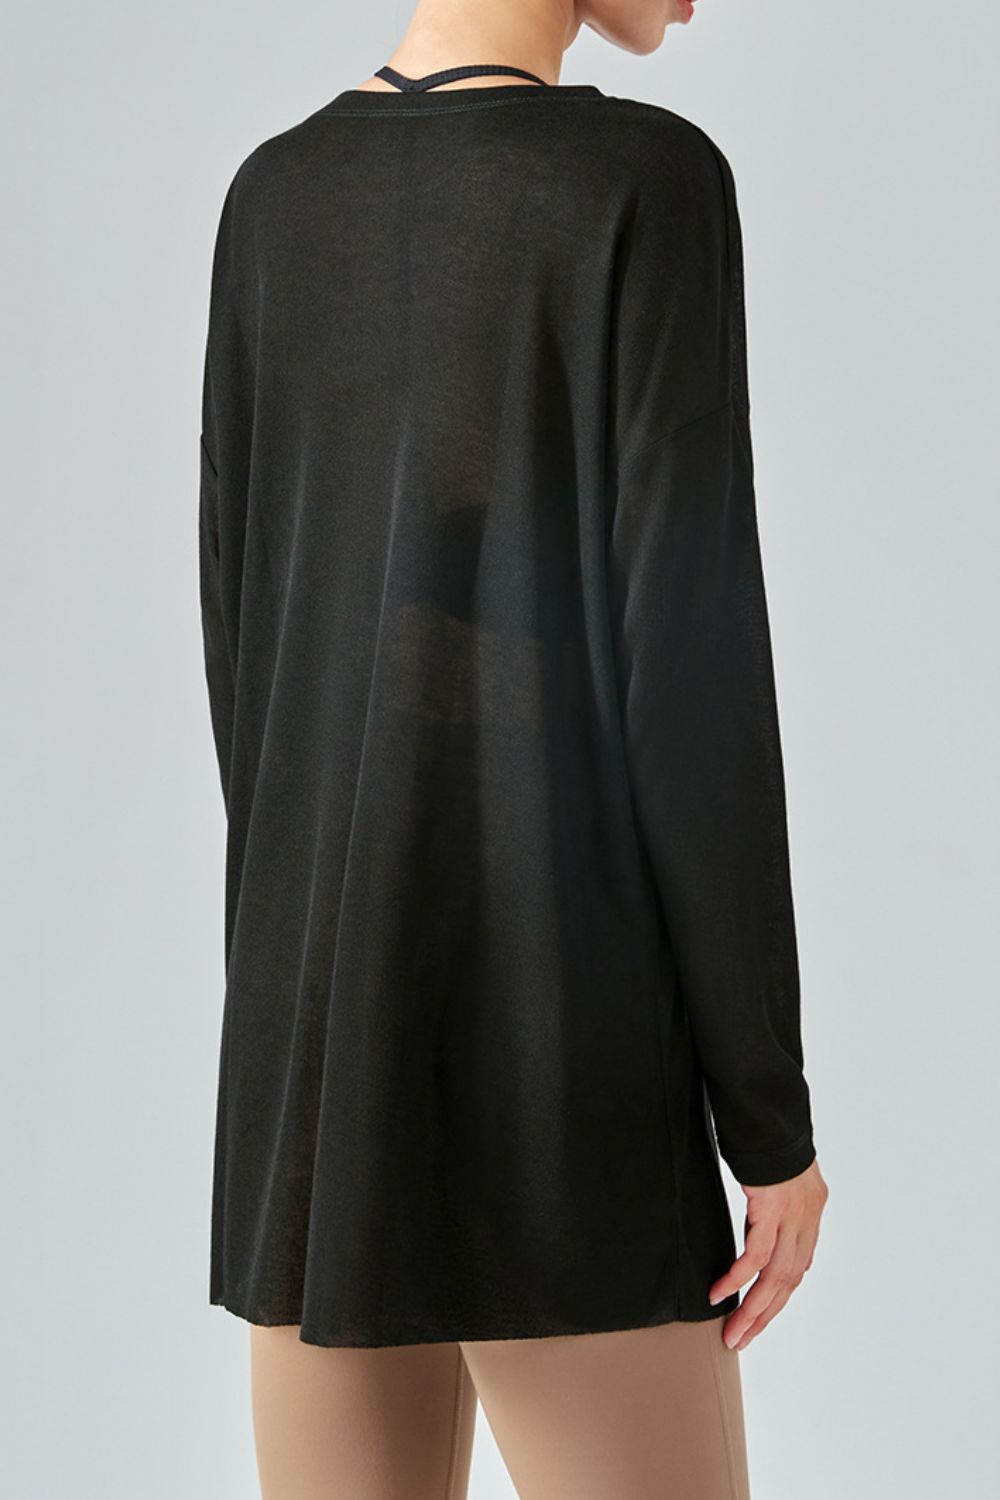 Round Neck Slit Sheer Tunic Sports Top